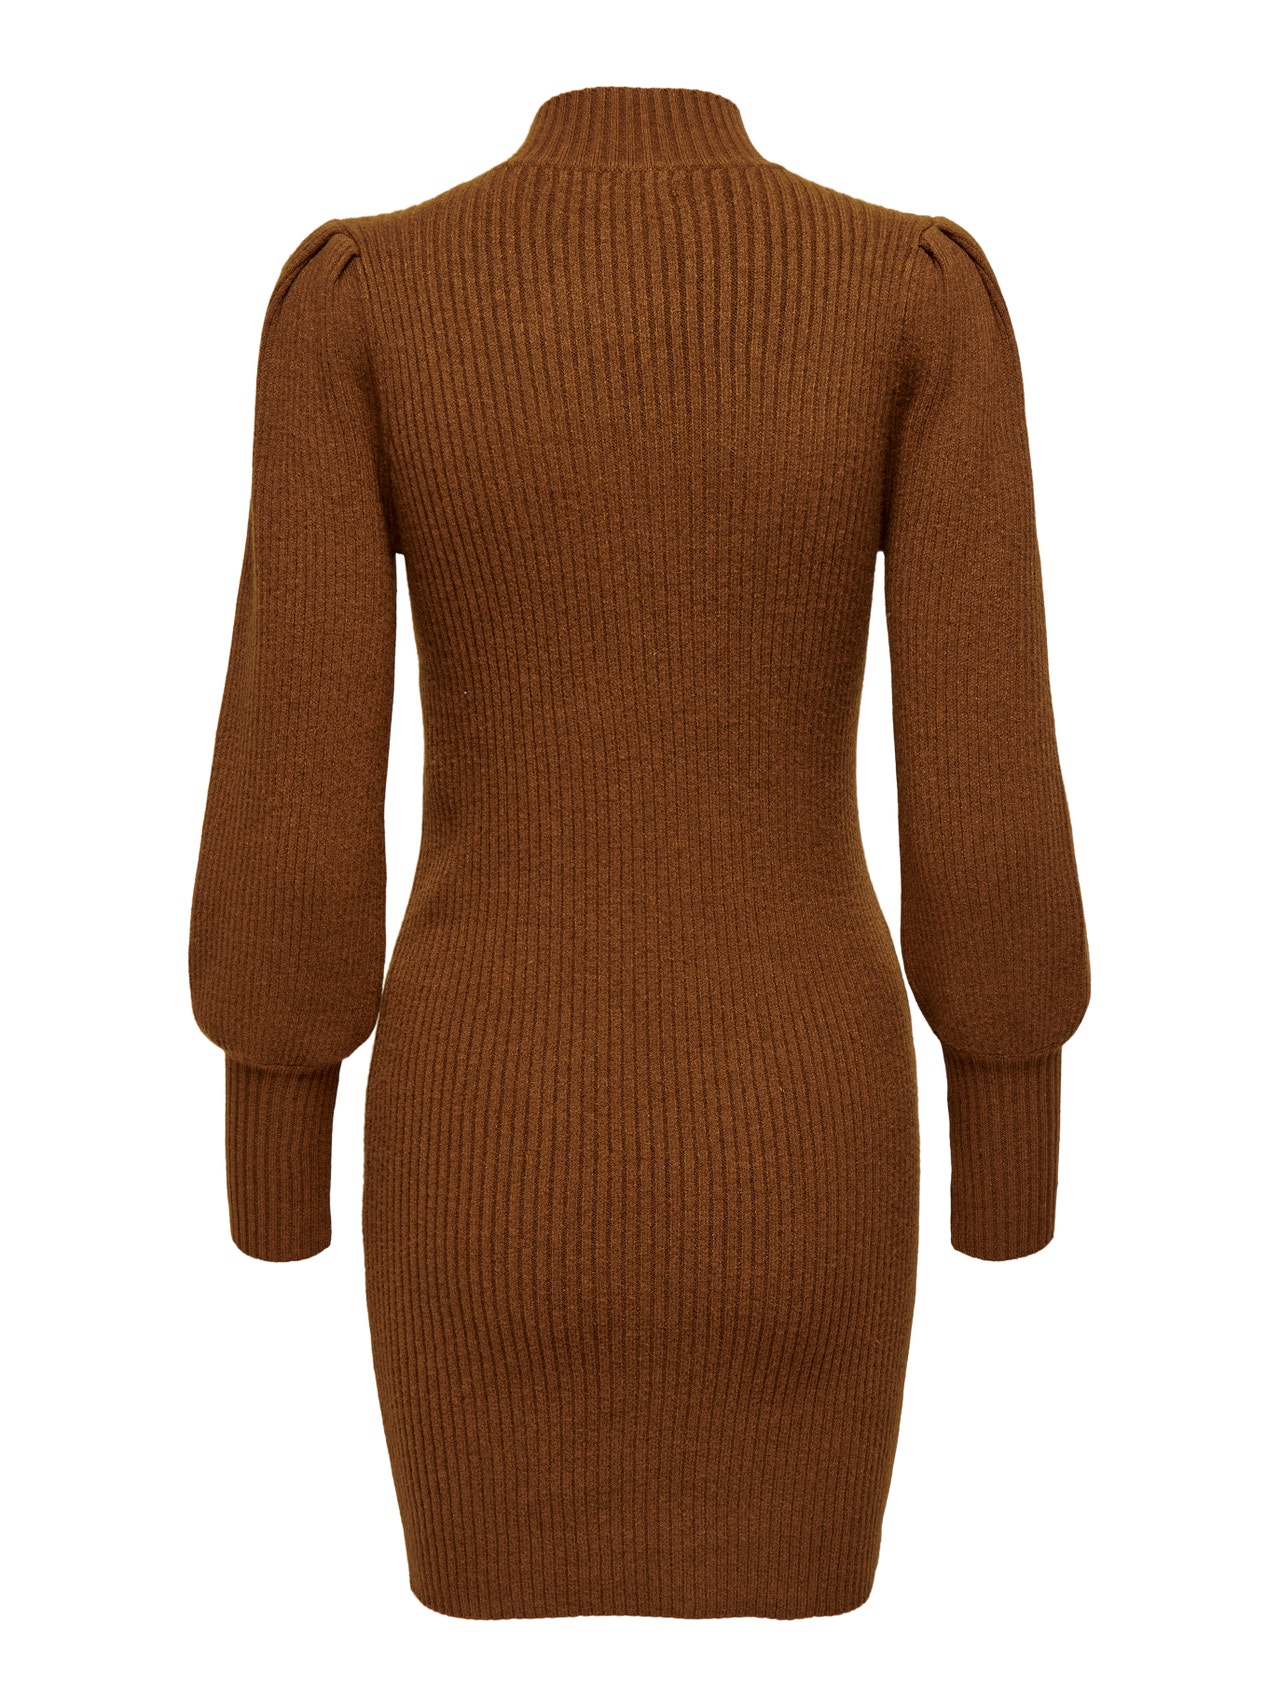 ONLY Mini knit dress with long sleeves -Argan Oil - 15232502